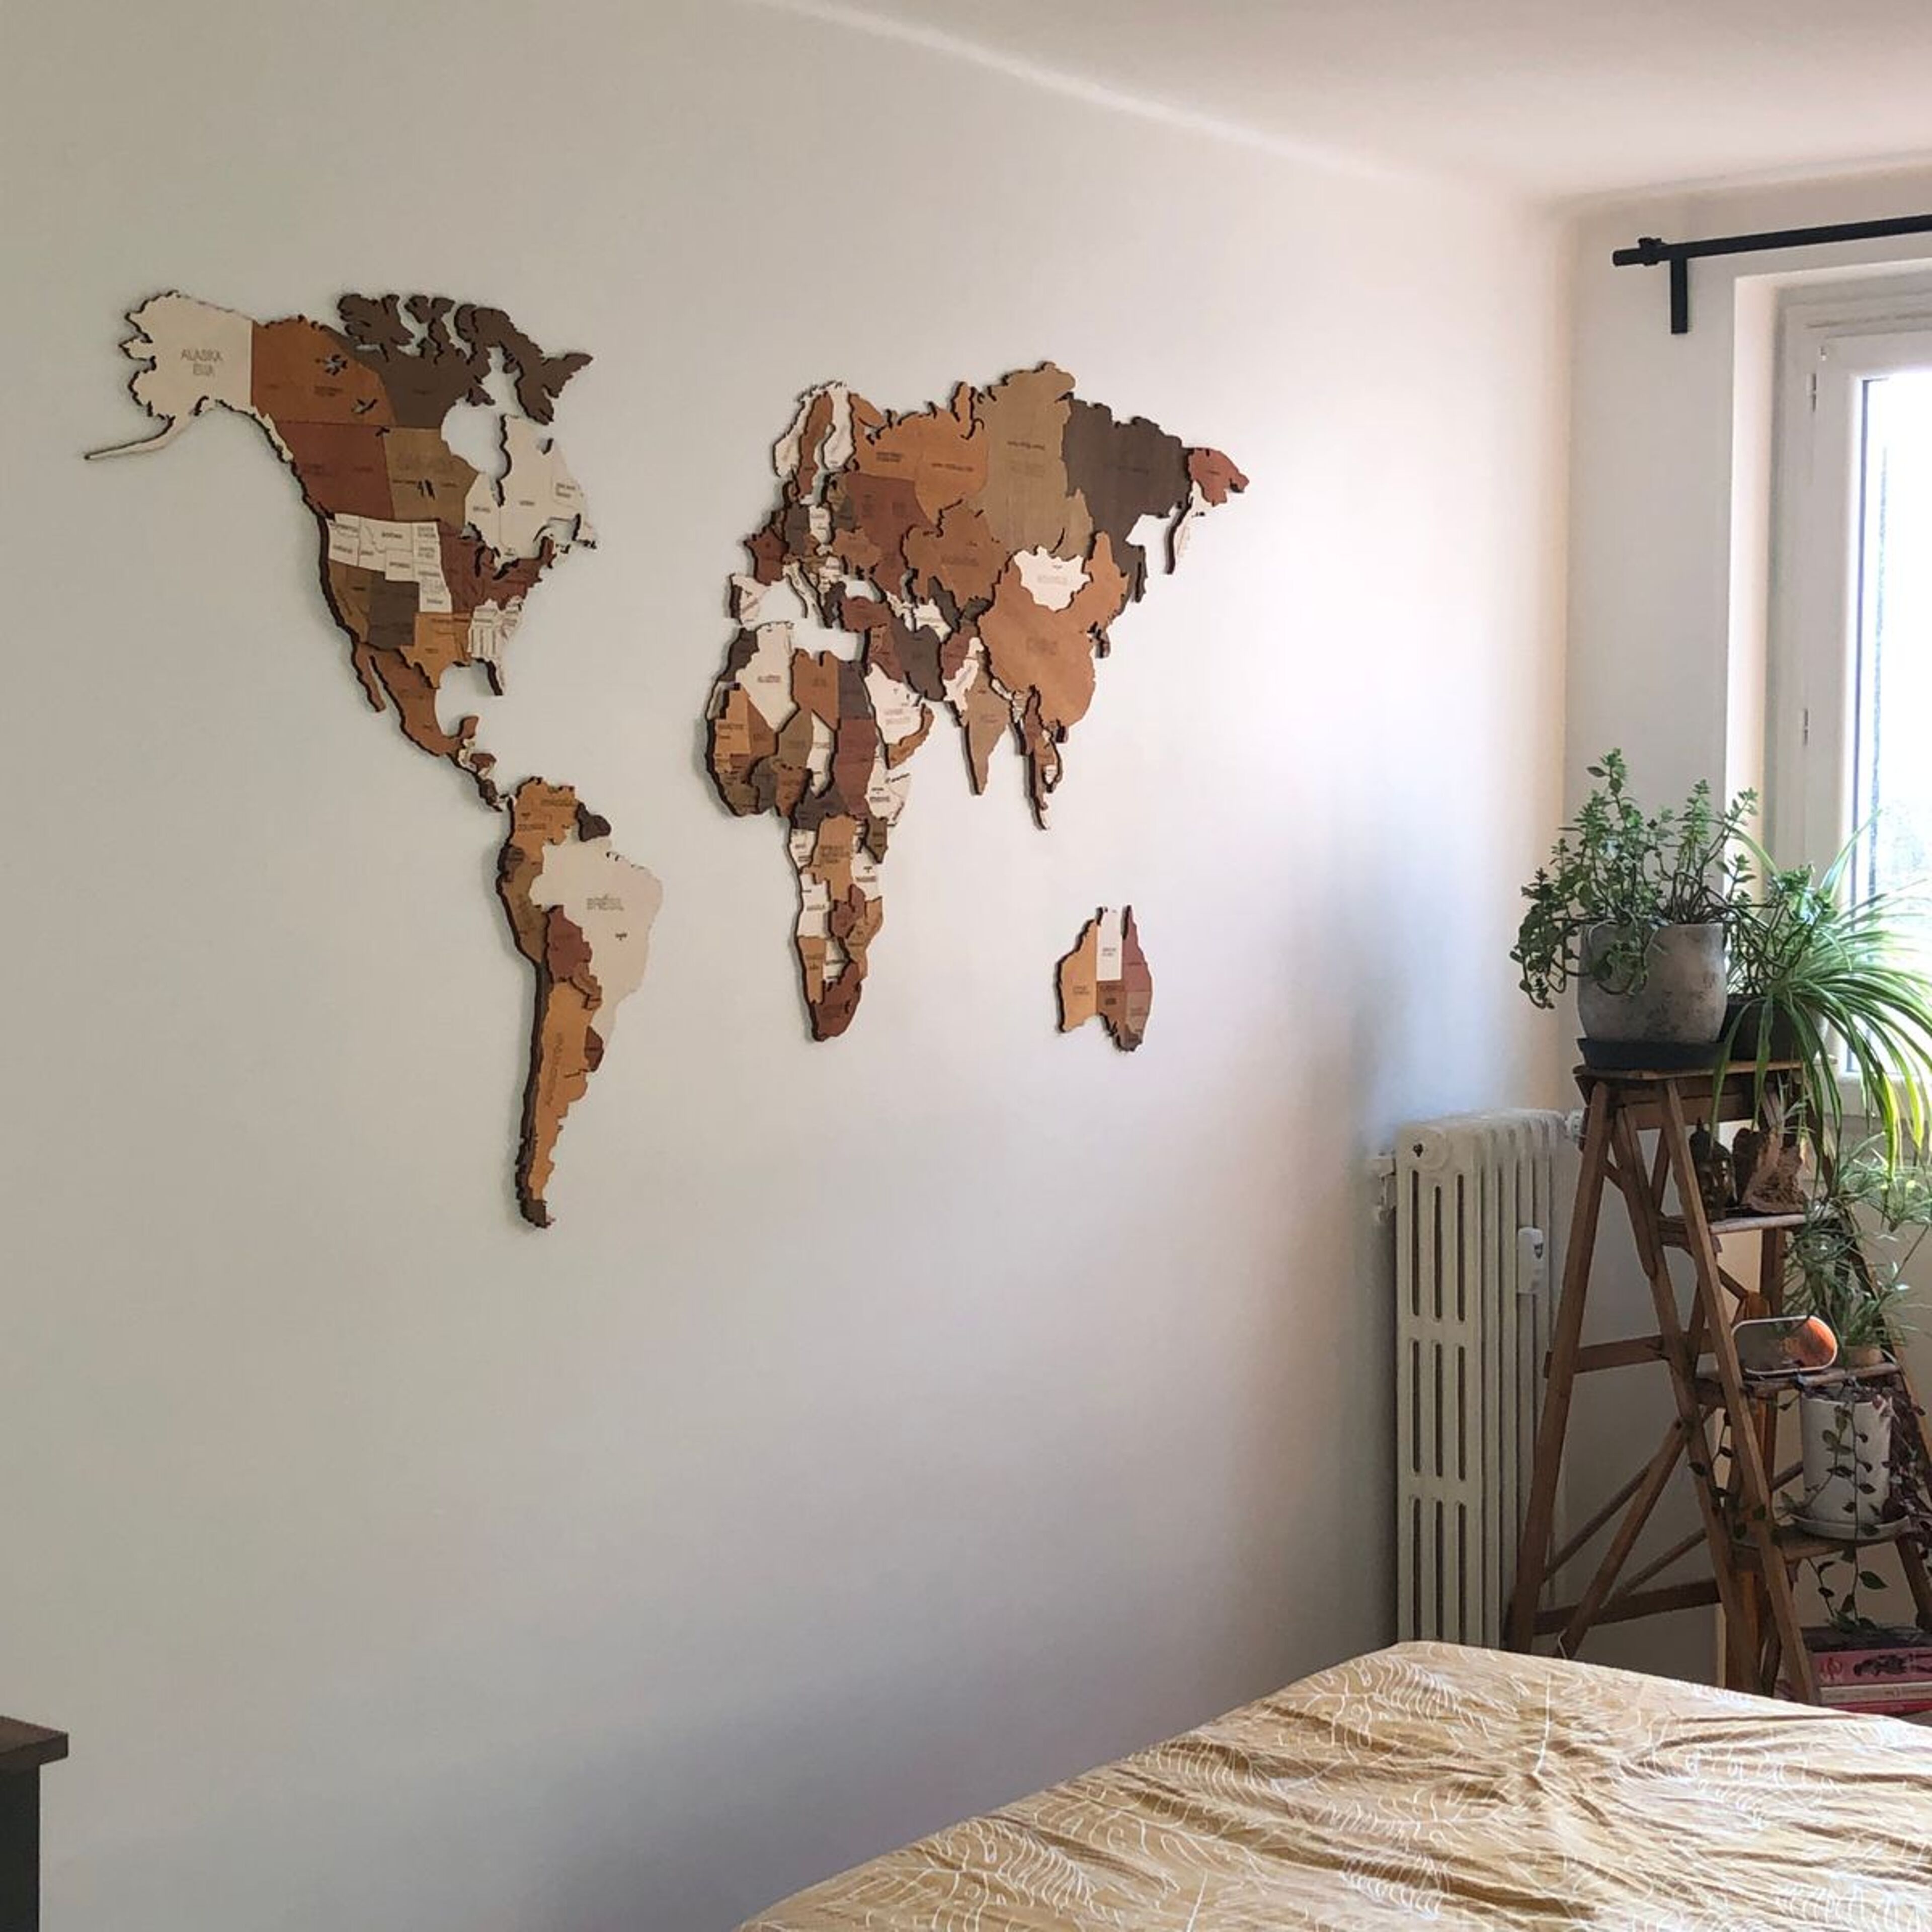 Review for Wooden World Map Wall Decoration - image from Beily Ko